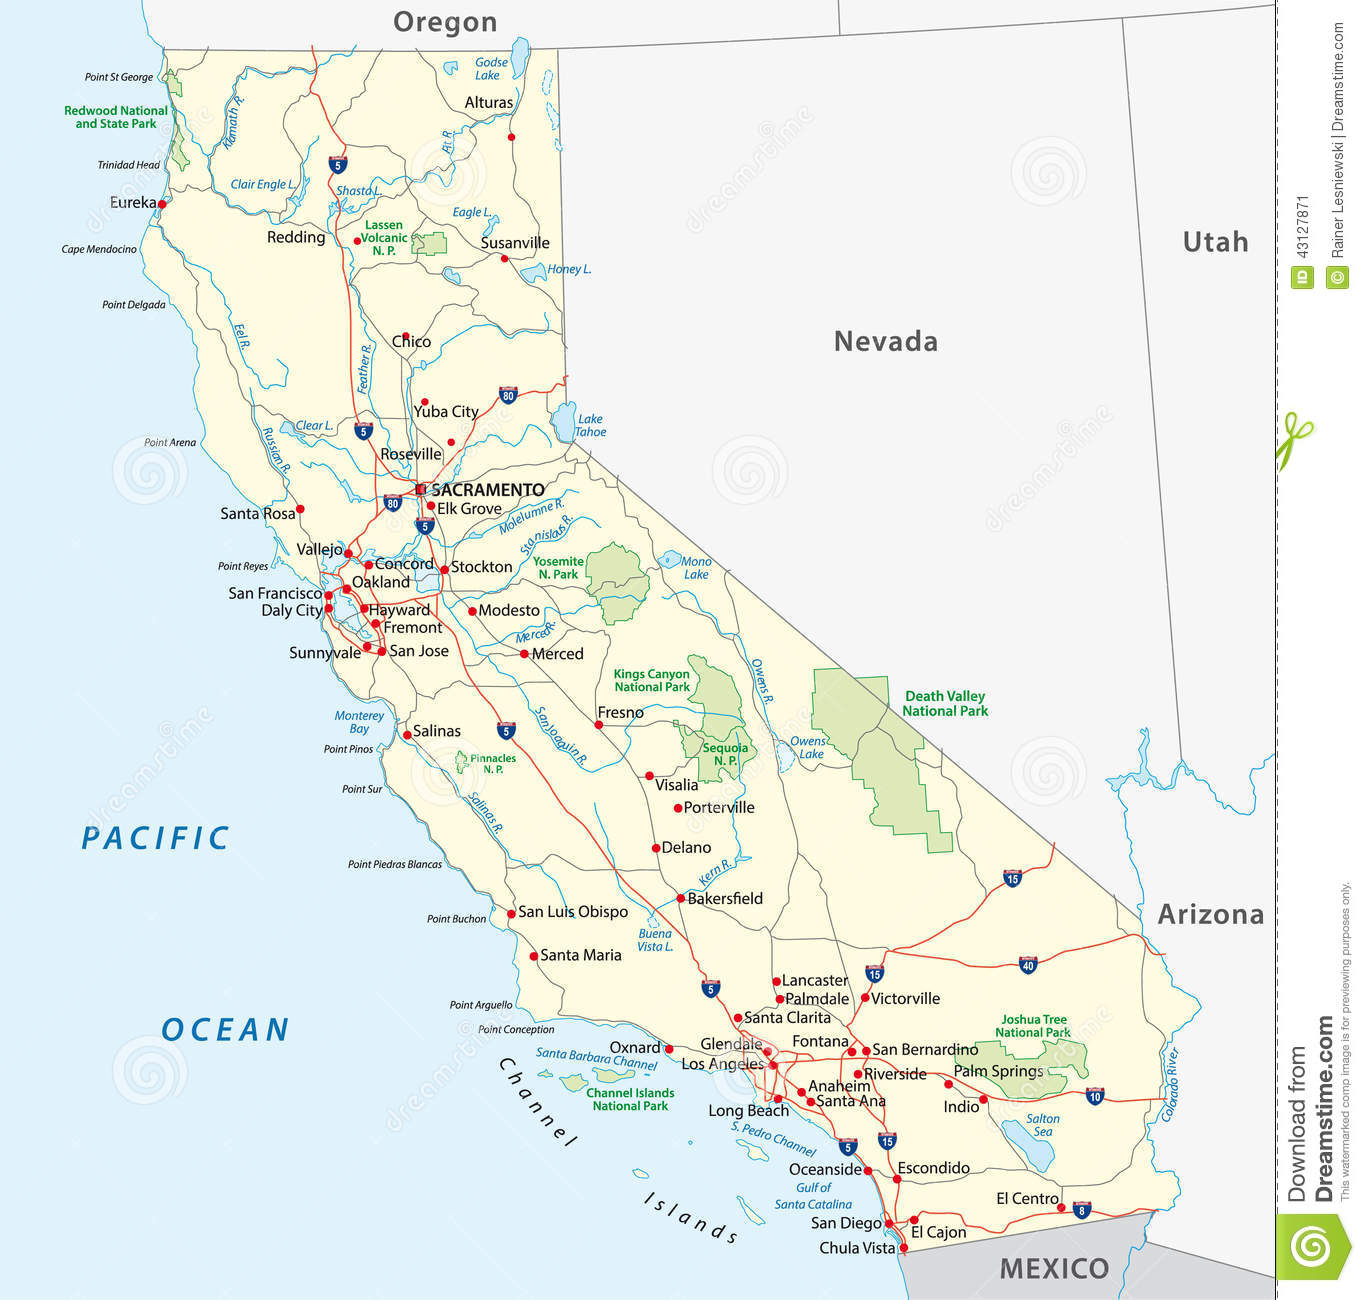 National Parks In California Map - Klipy - California State And National Parks Map